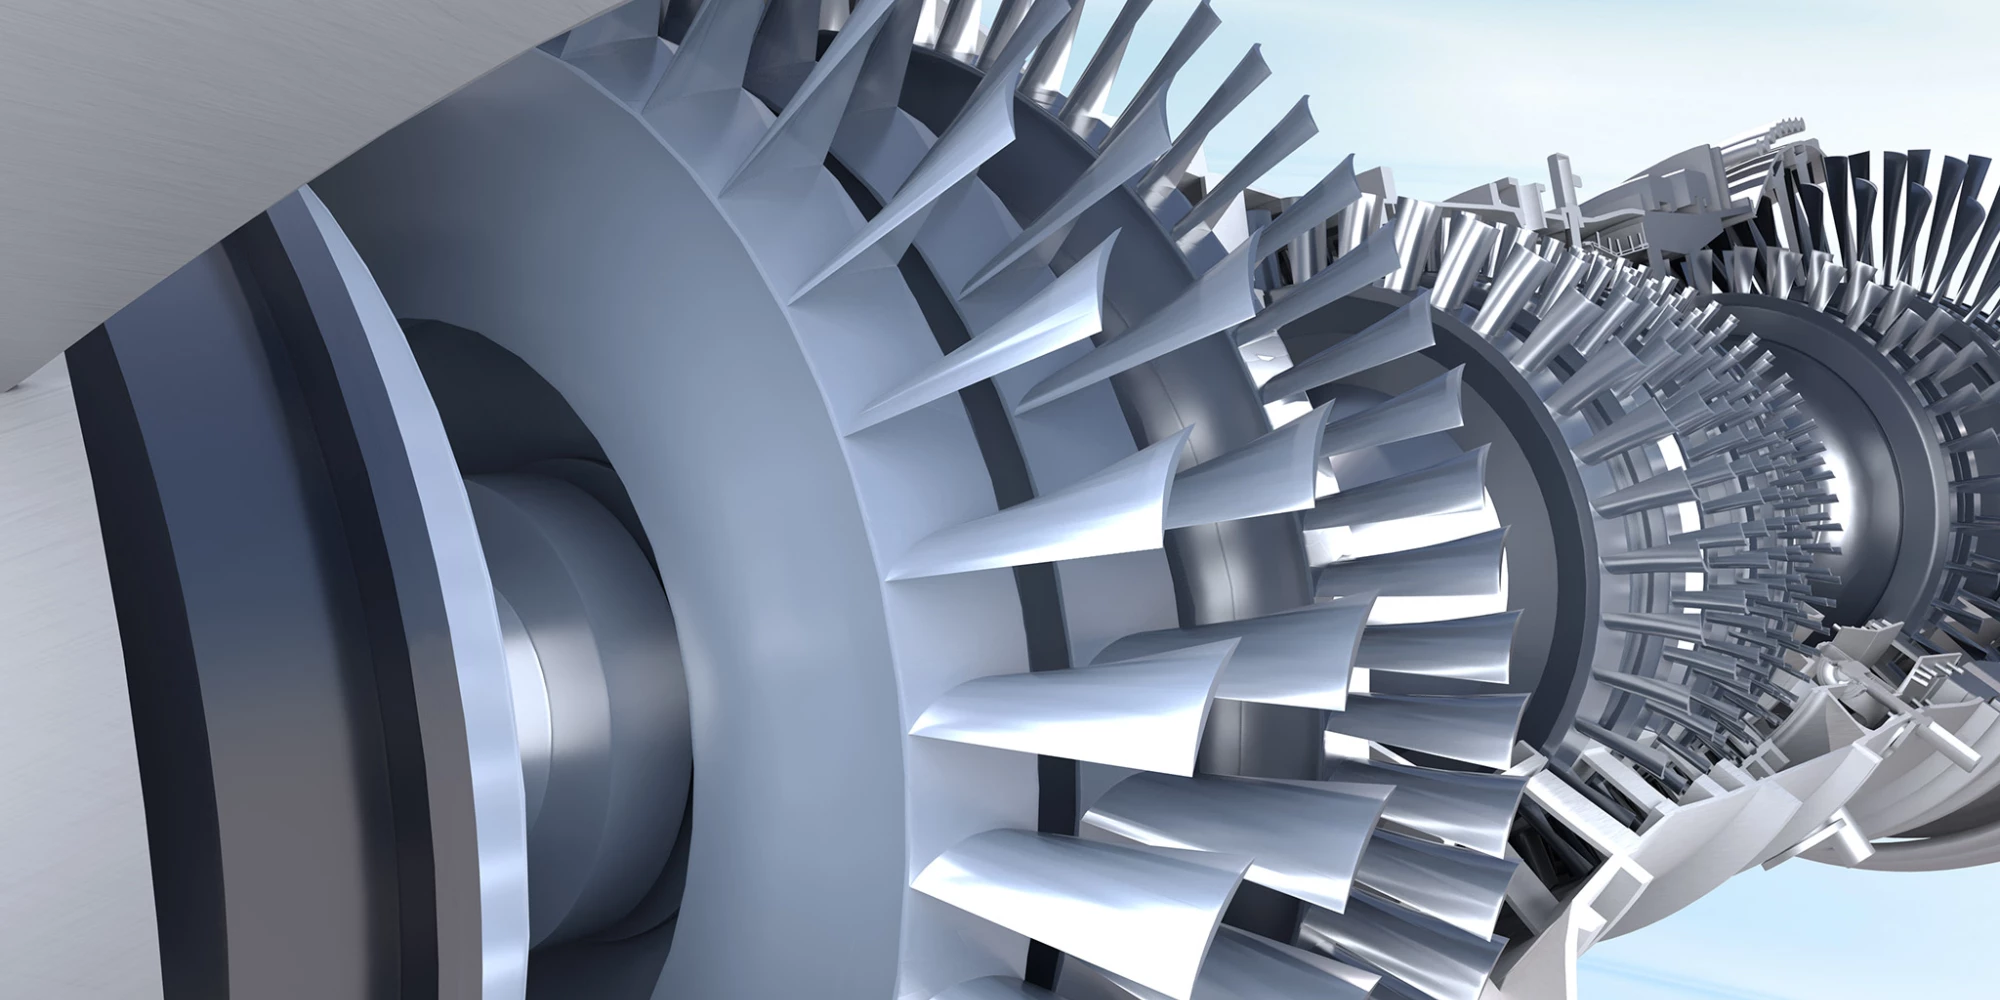 How does a turbofan engine work? – The structure of an engine